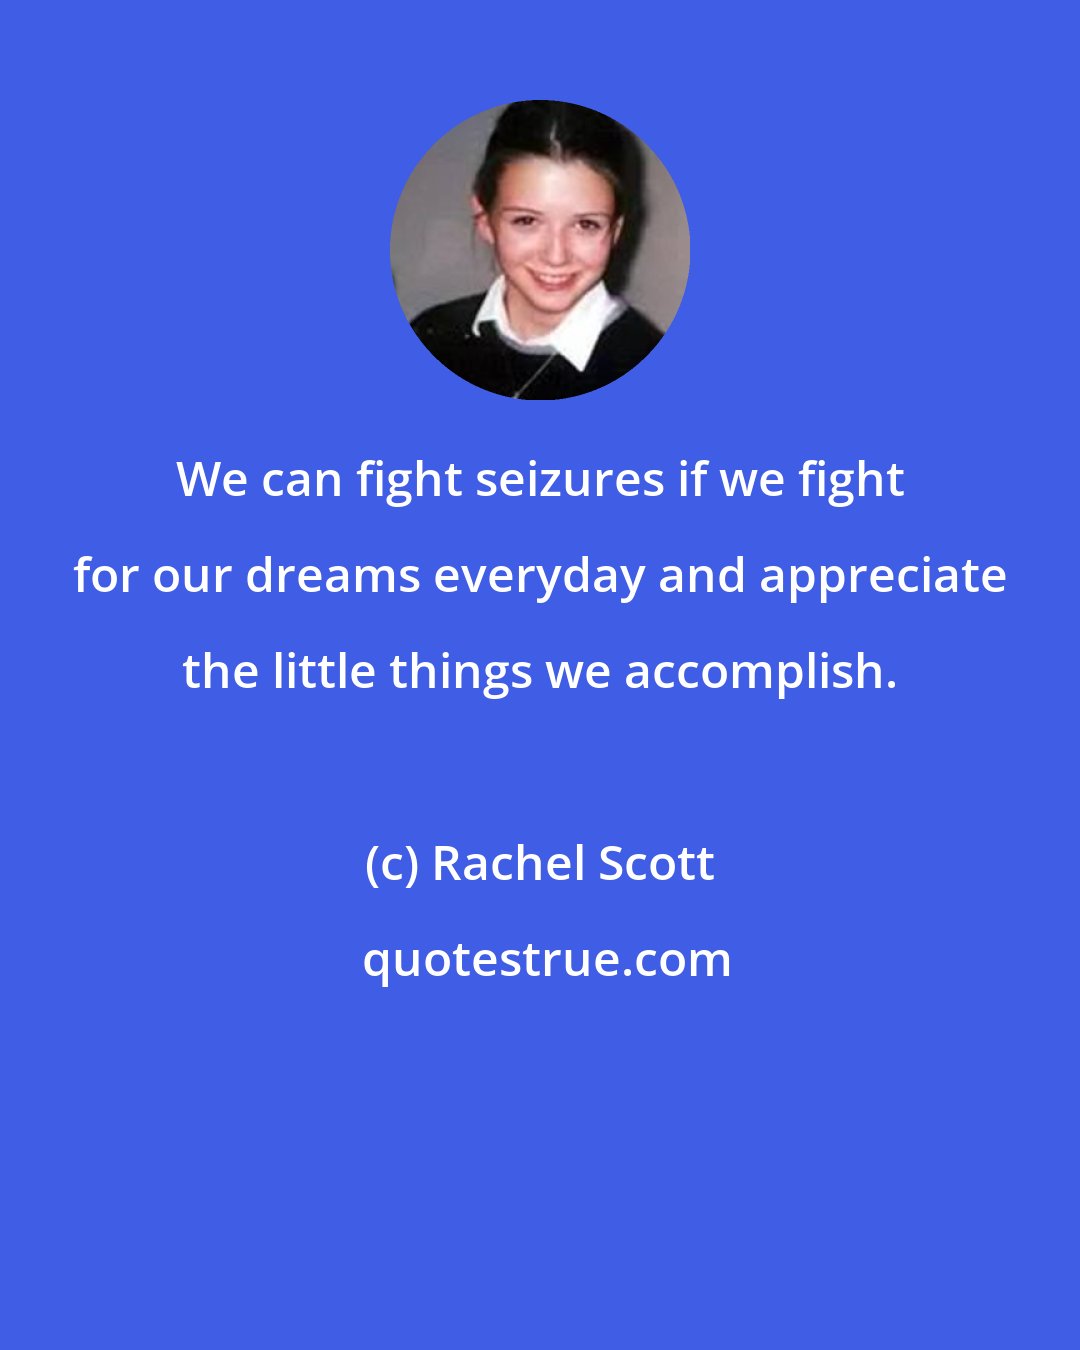 Rachel Scott: We can fight seizures if we fight for our dreams everyday and appreciate the little things we accomplish.